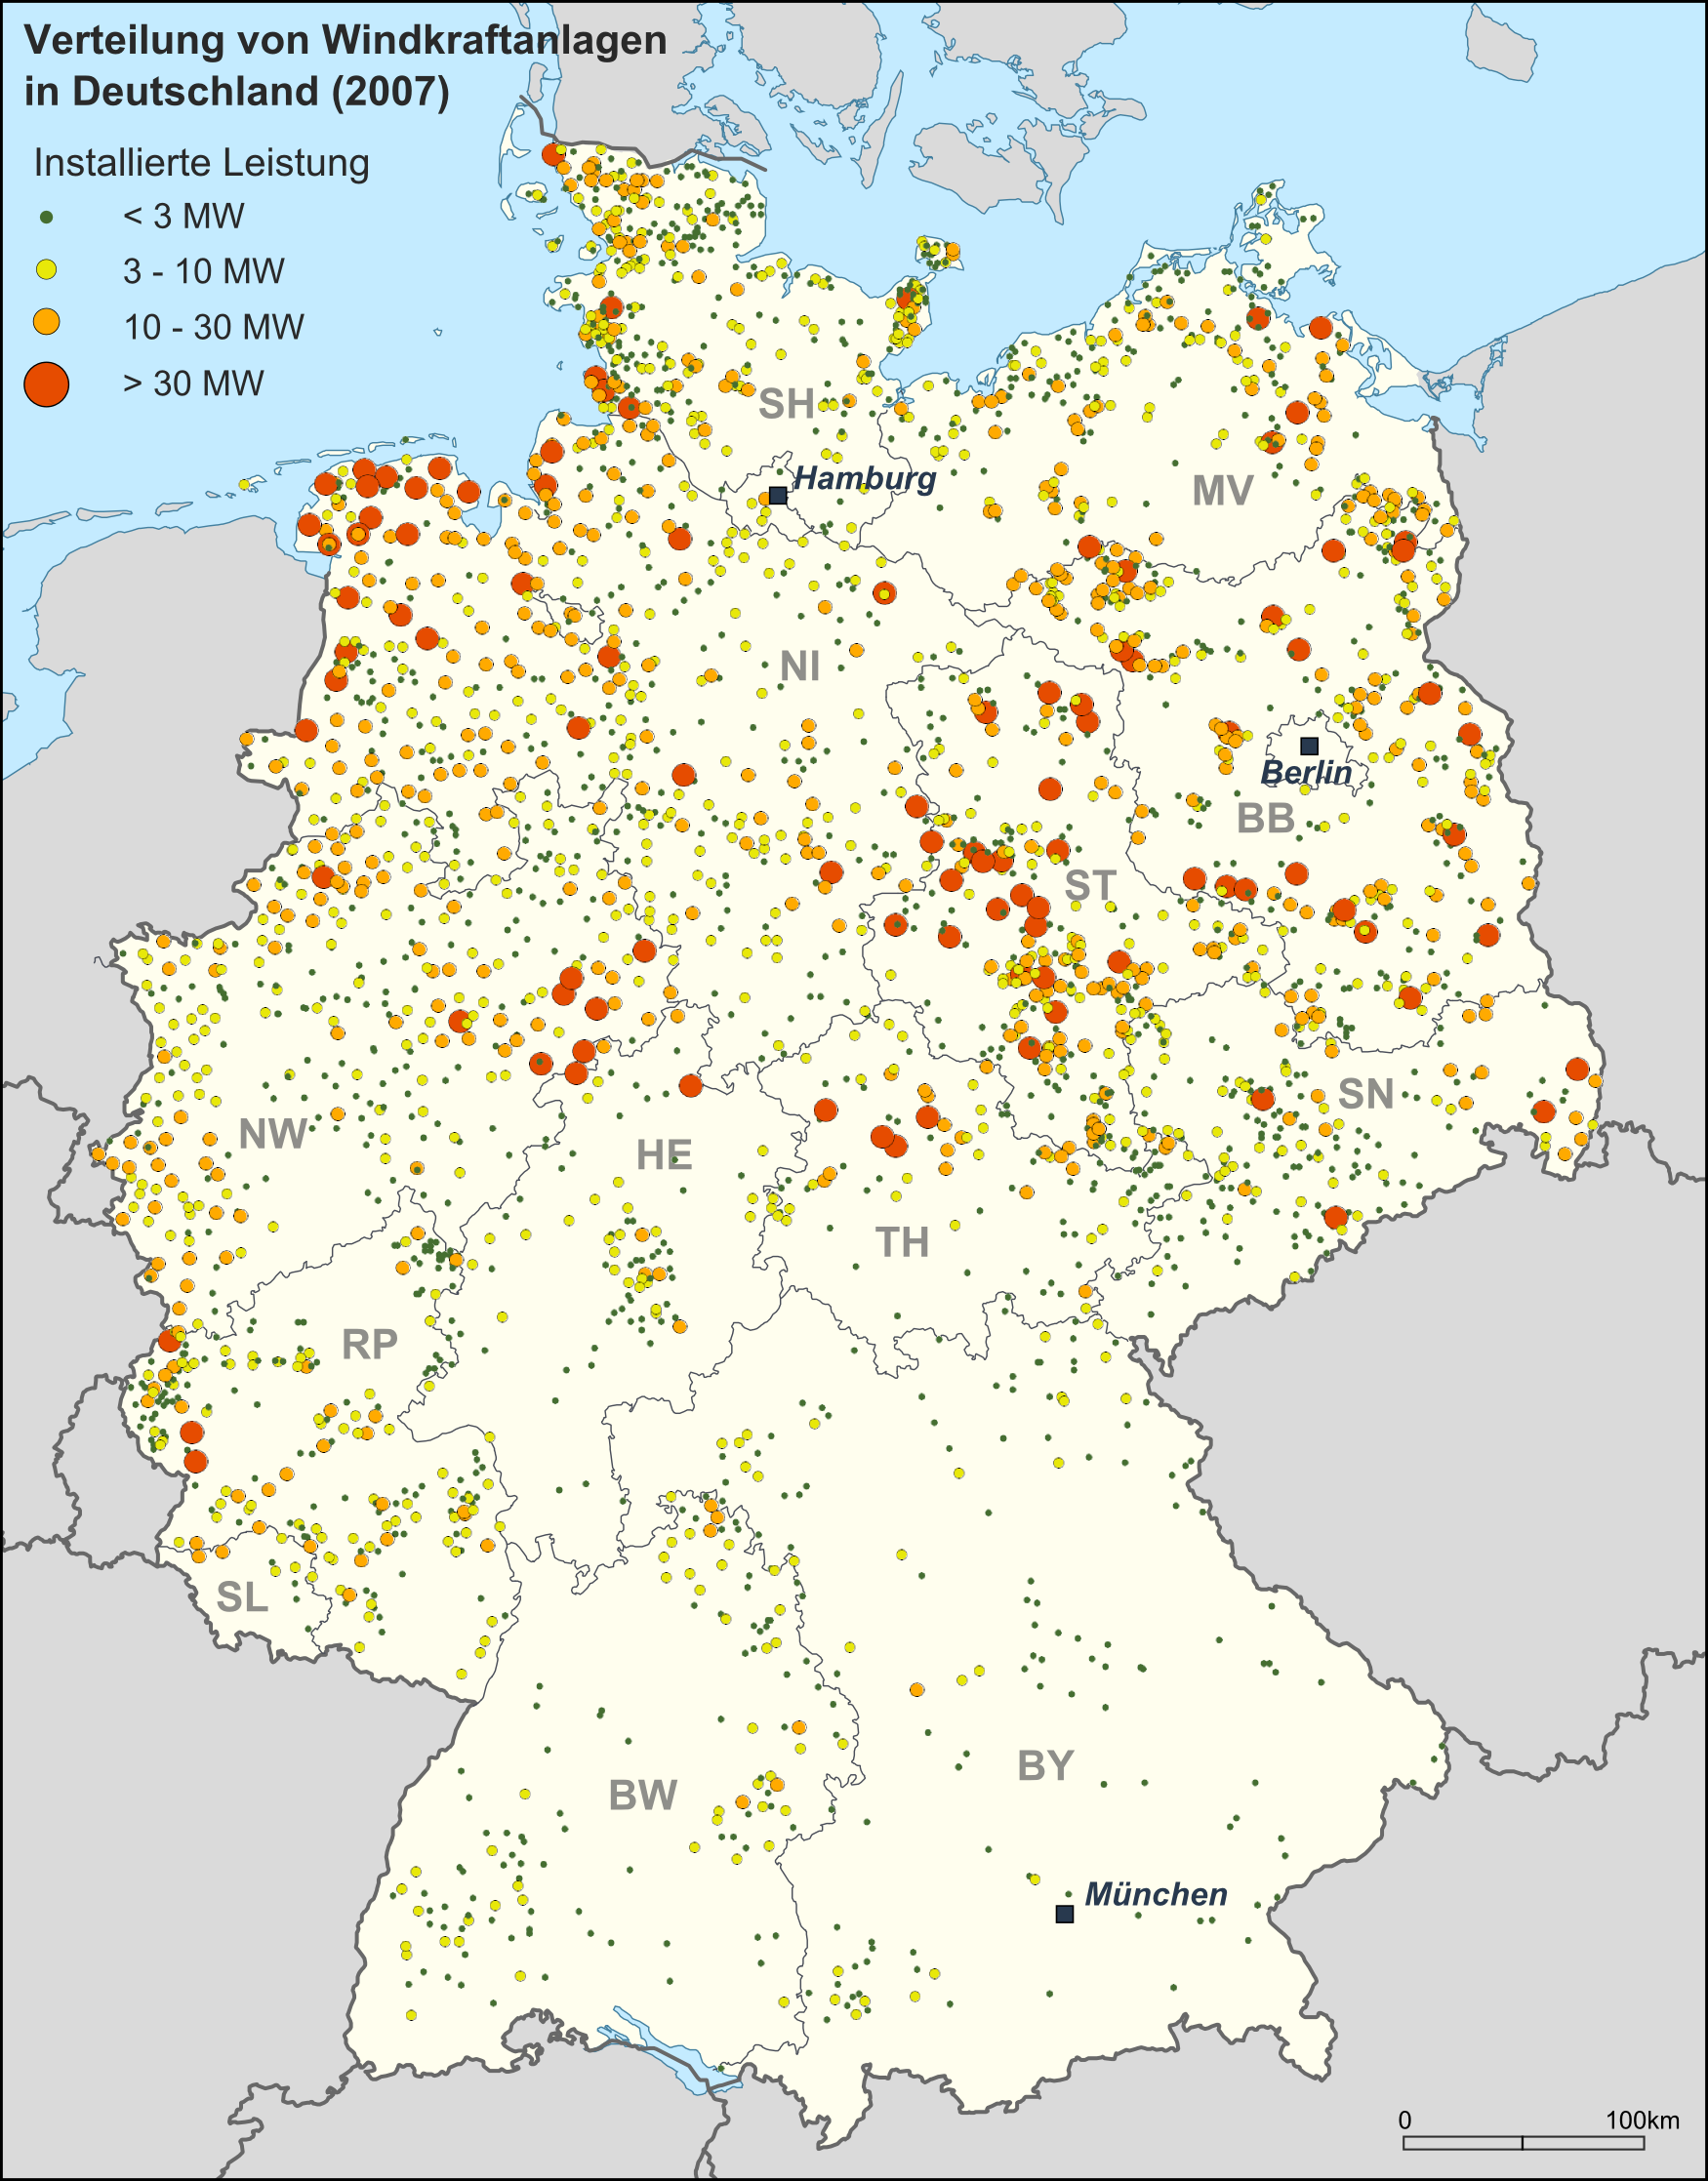 Wind farms in Germany 2008 - Full size